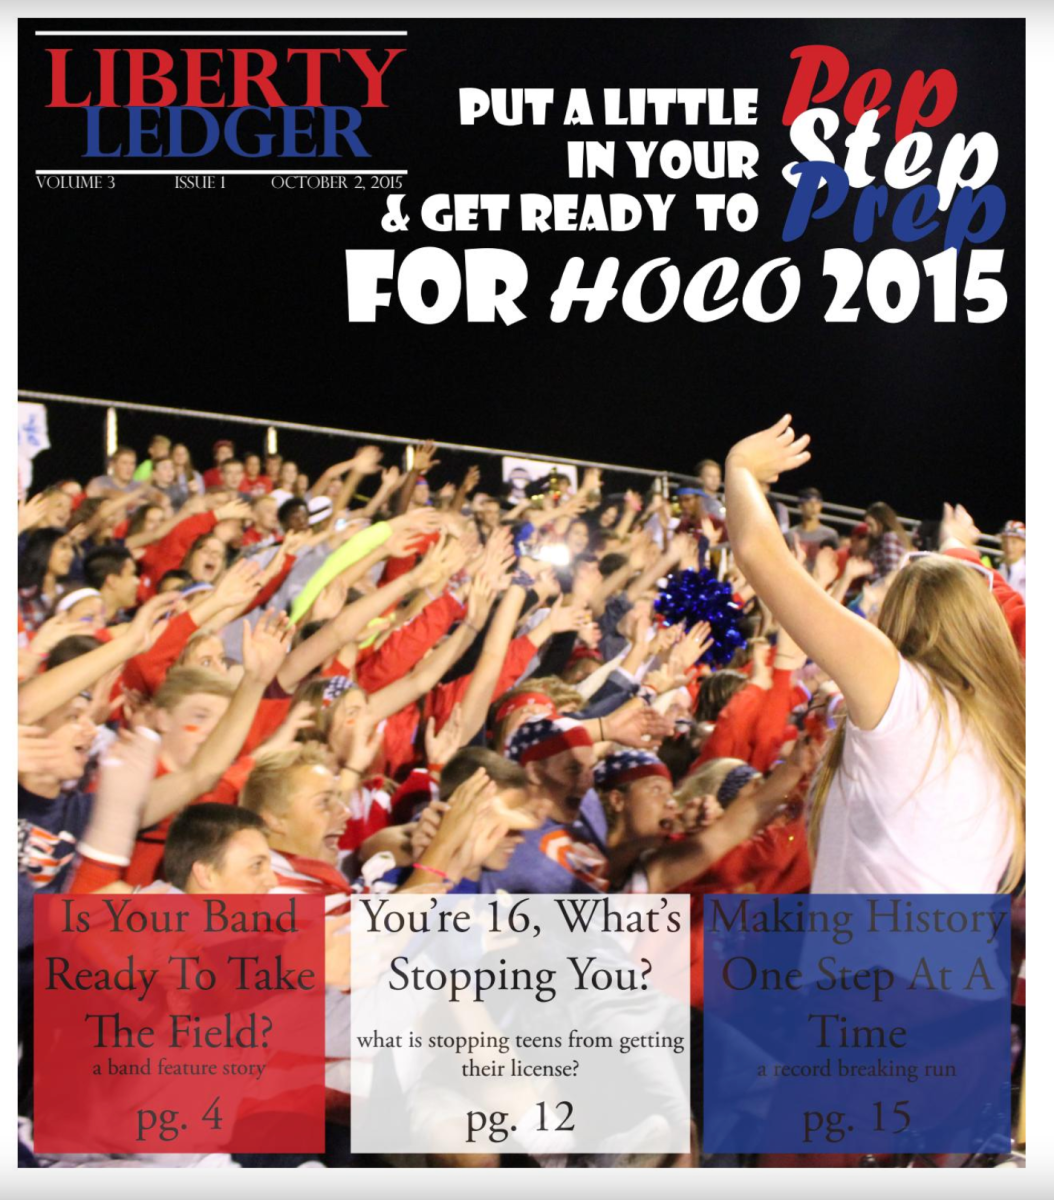 The Ledger Volume 3 Issue 1: Put a Little Pep in Your Step & Get Ready for Hoco 2015